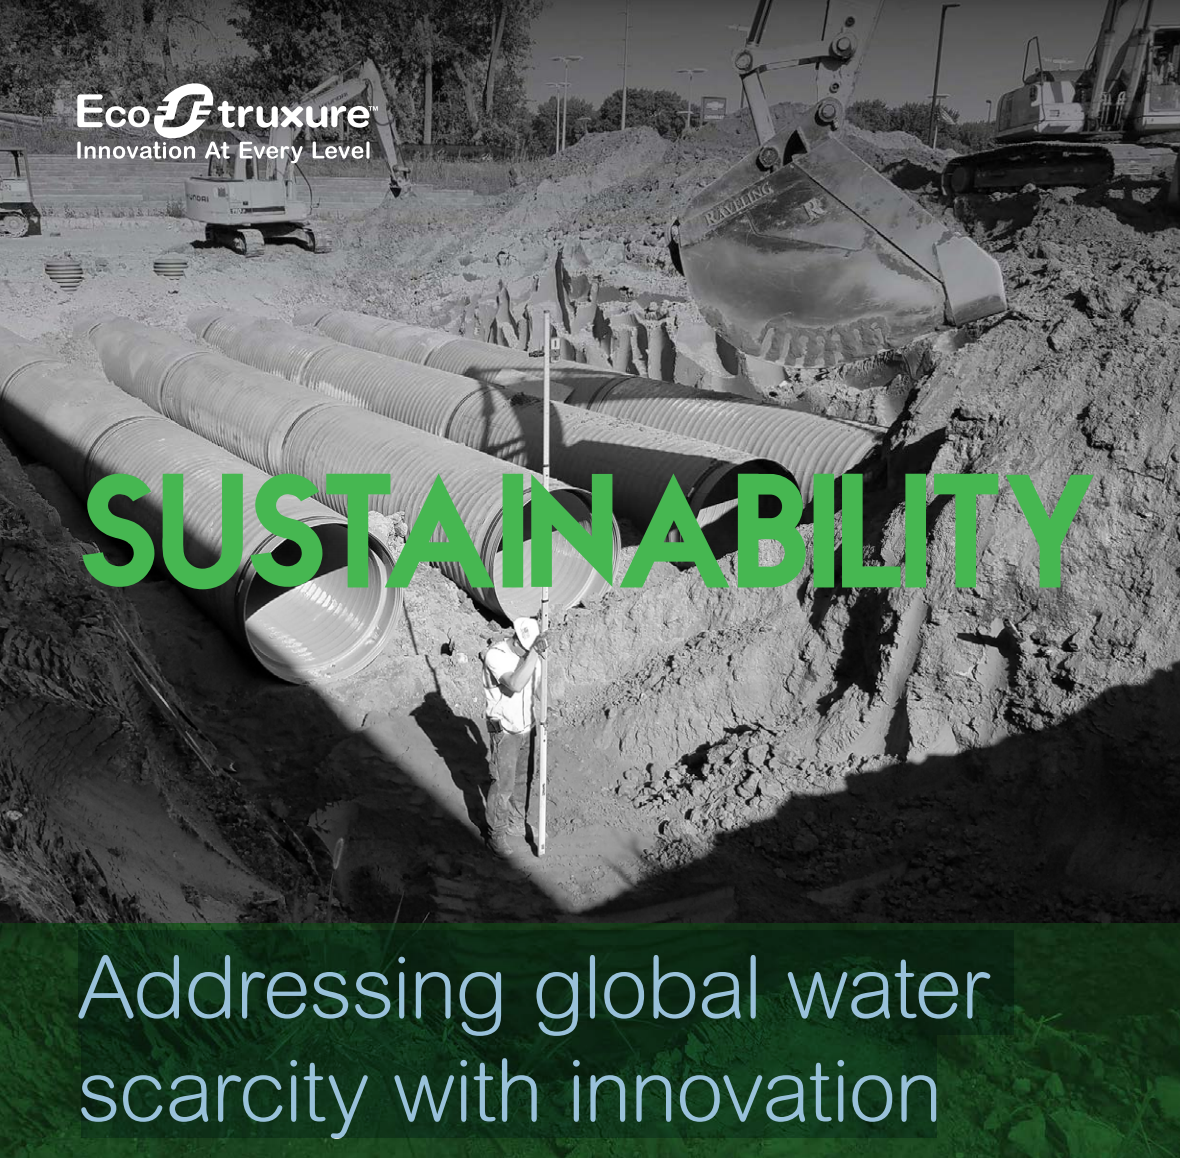 Addressing global water scarcity with innovation